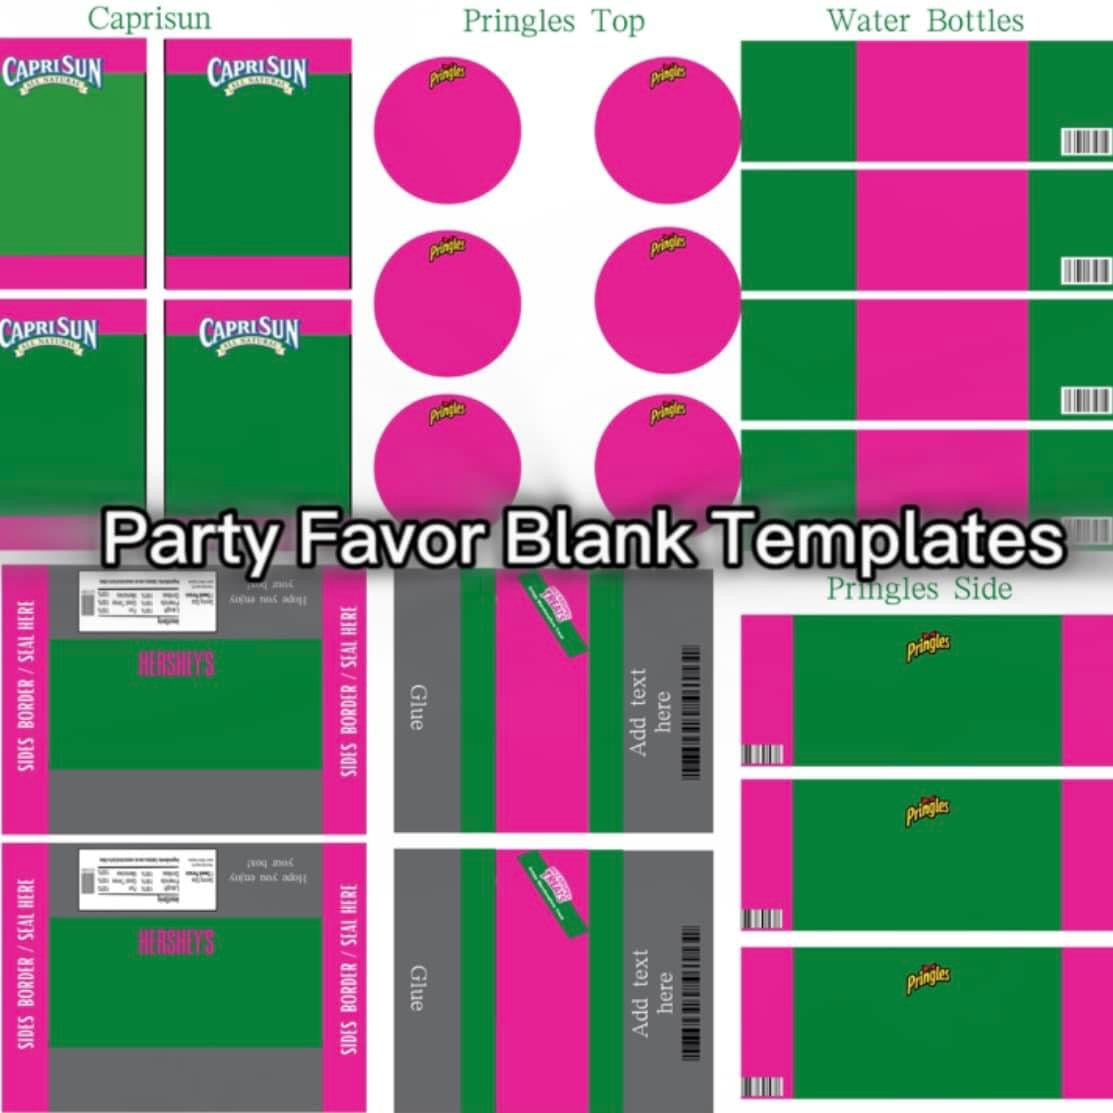 Party Favor Blank Templates